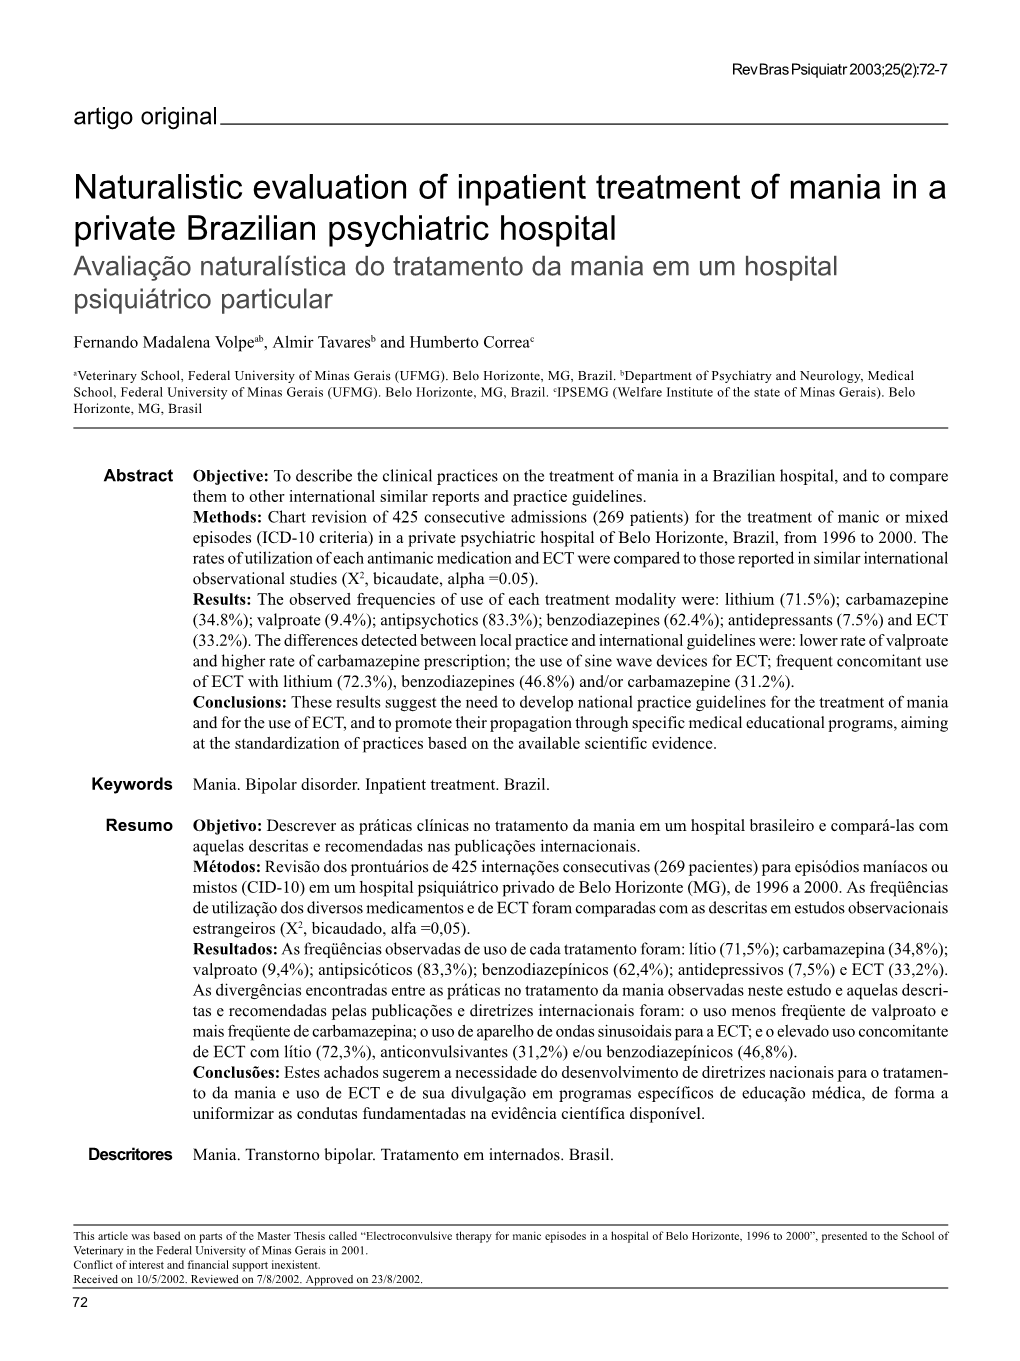 Naturalistic Evaluation of Inpatient Treatment of Mania in a Private